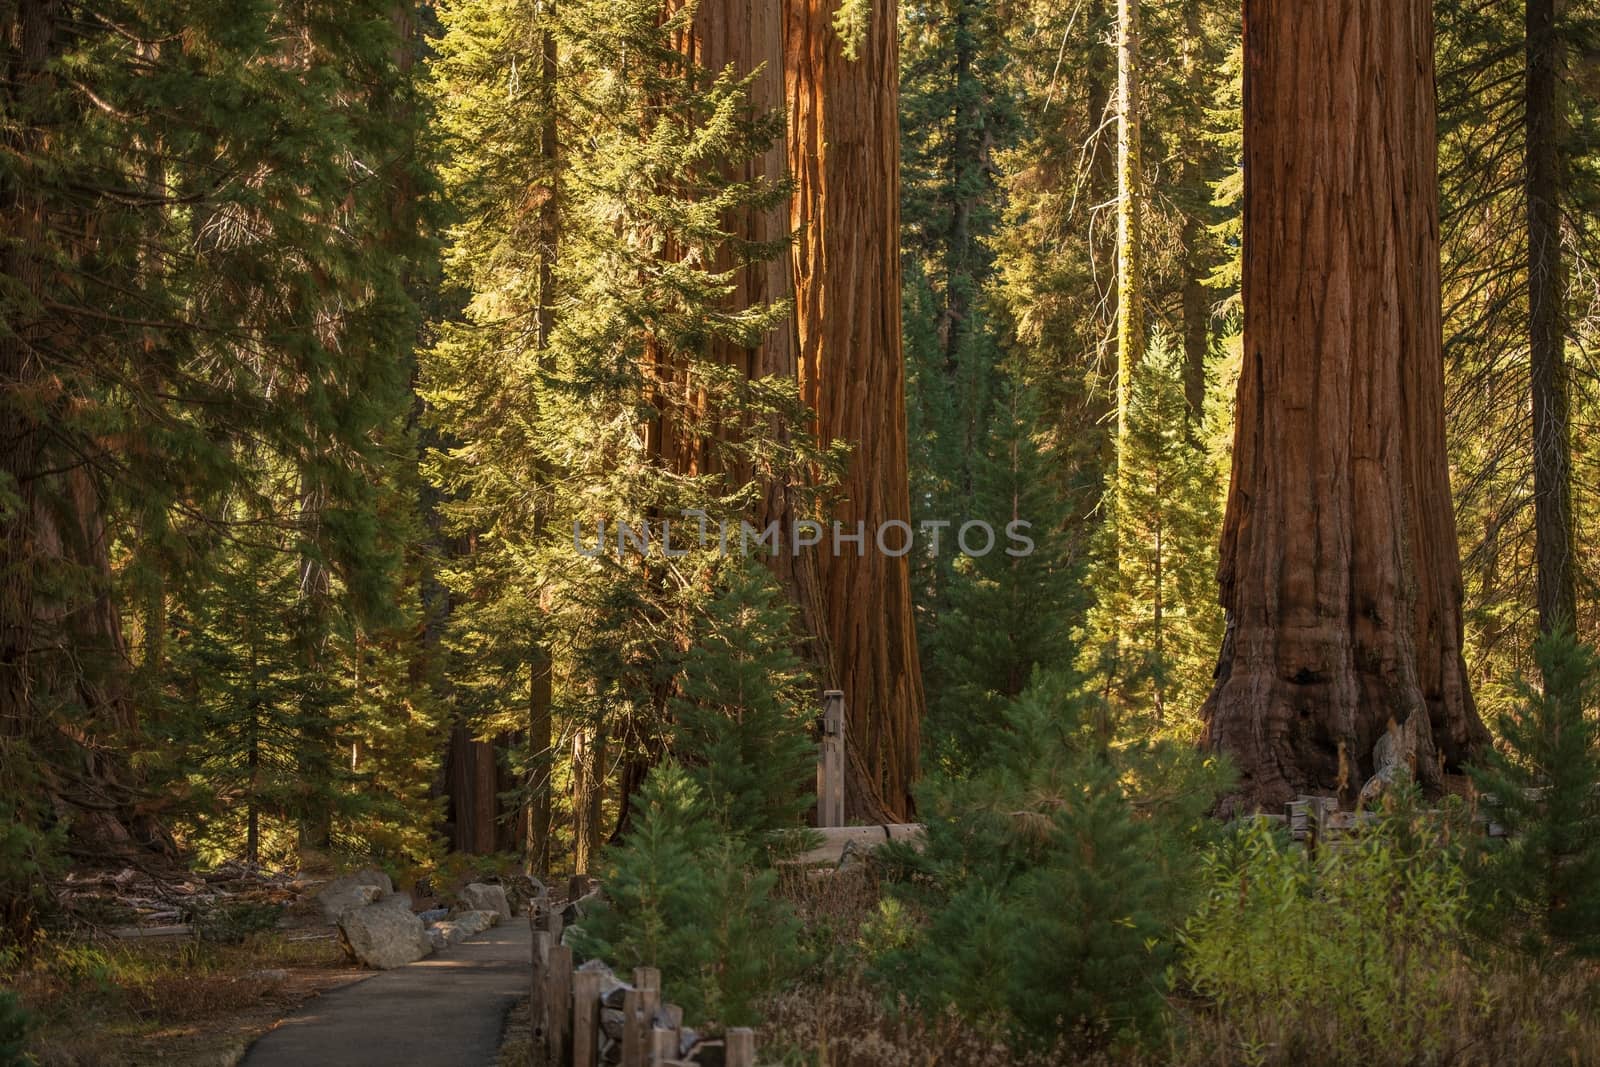 Sequoias National Park Place. California Sierra Nevada Mountains. United States of America.